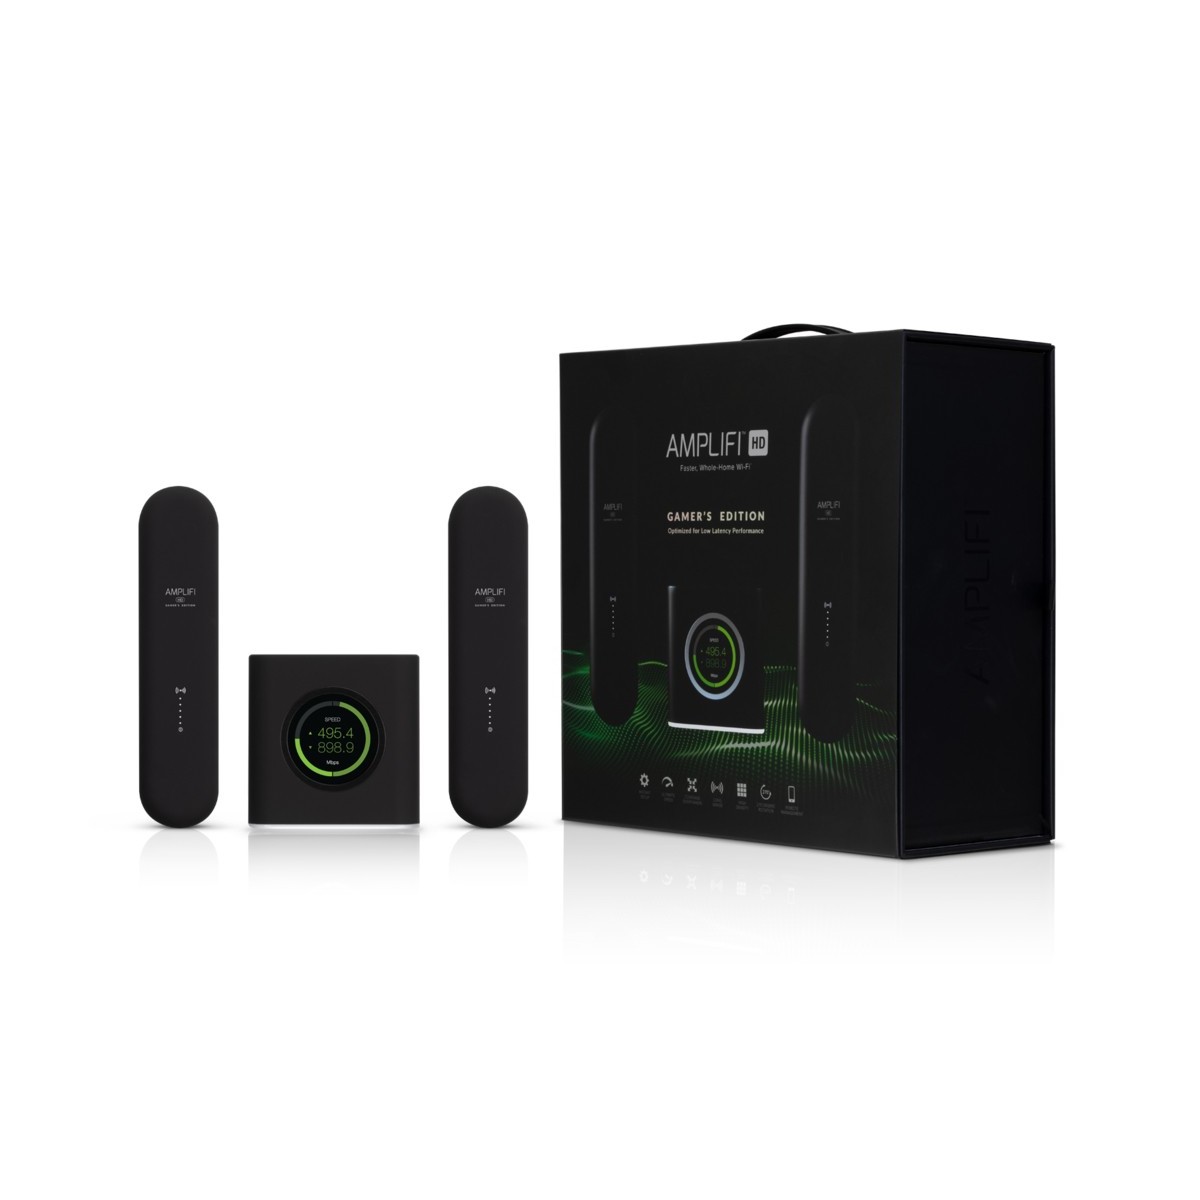 UbiQuiti AmpliFi HD Gamer’s Edition - Wi-Fi 5 (802.11ac) - Dual-band (2.4 GHz / 5 GHz) - Ethernet LAN - Black - Tabletop router